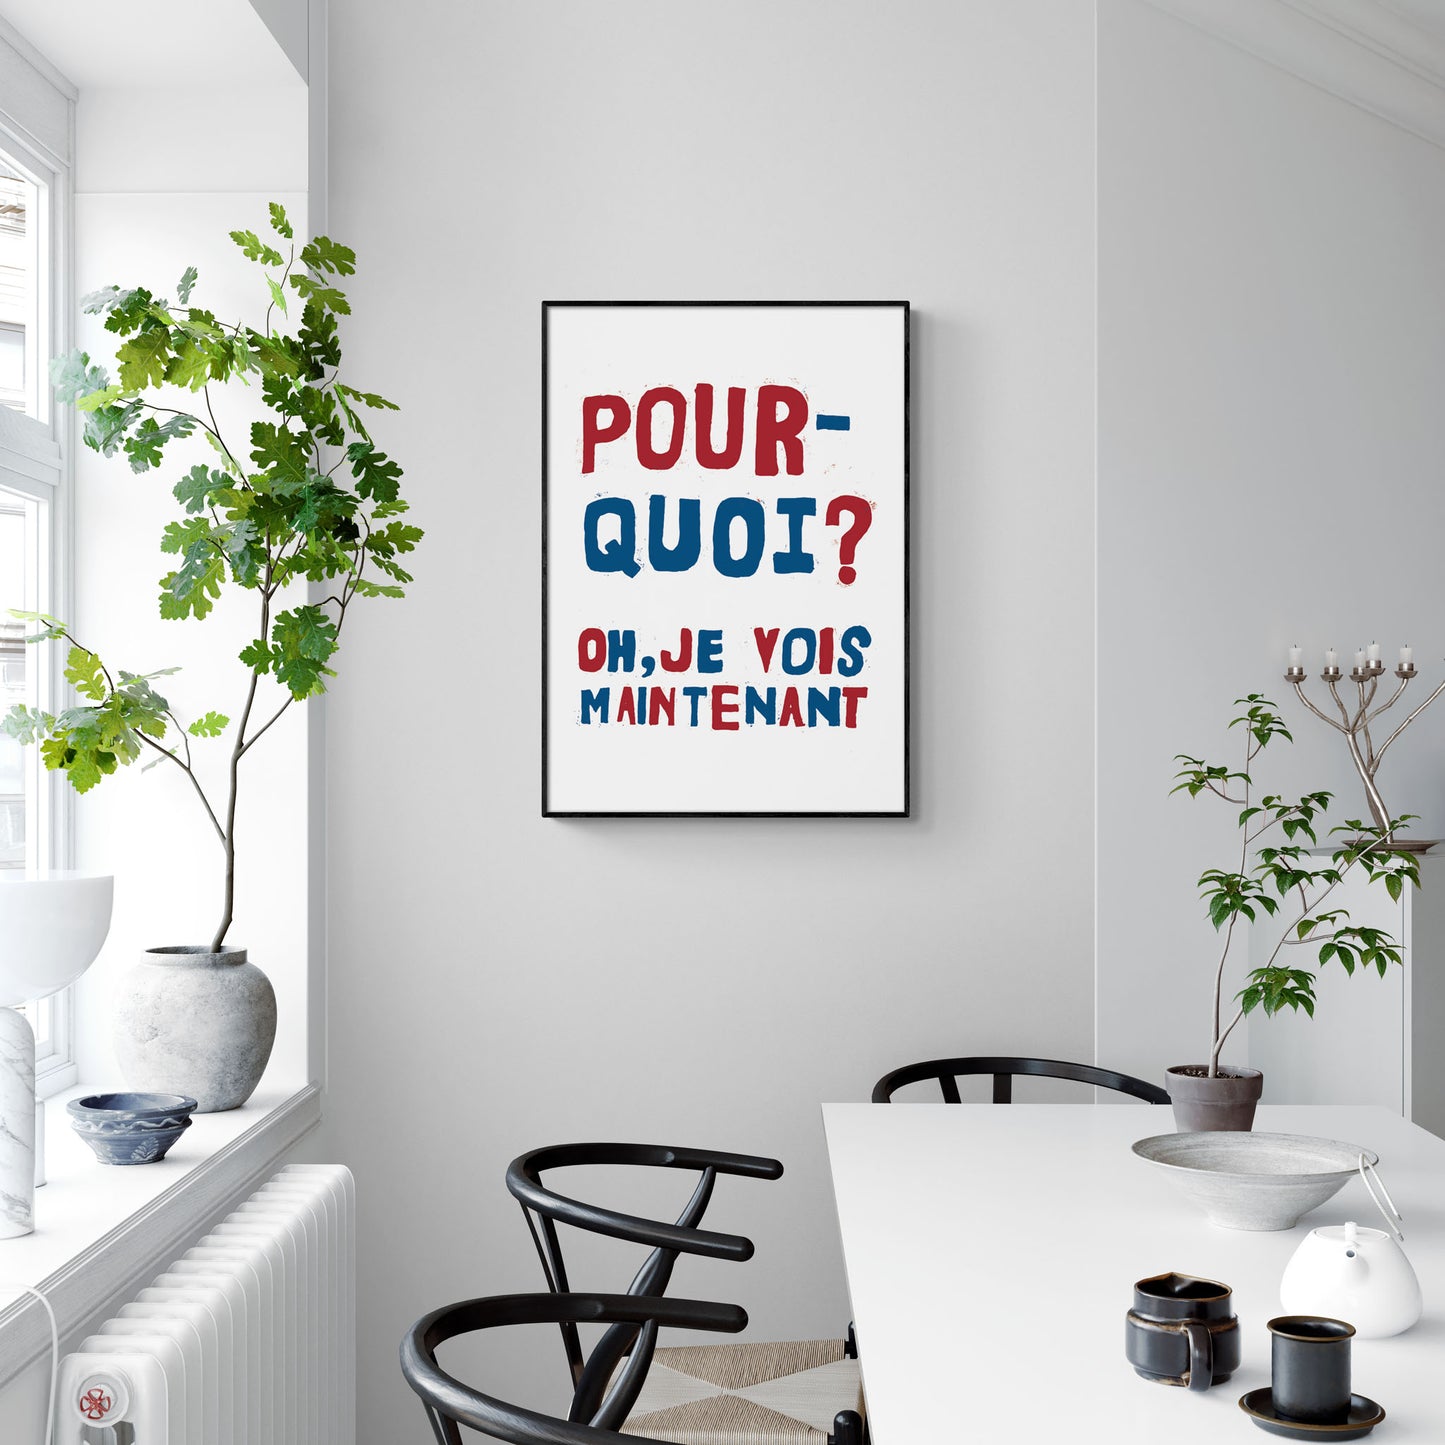 Pourquoi? Why? Protest Poster